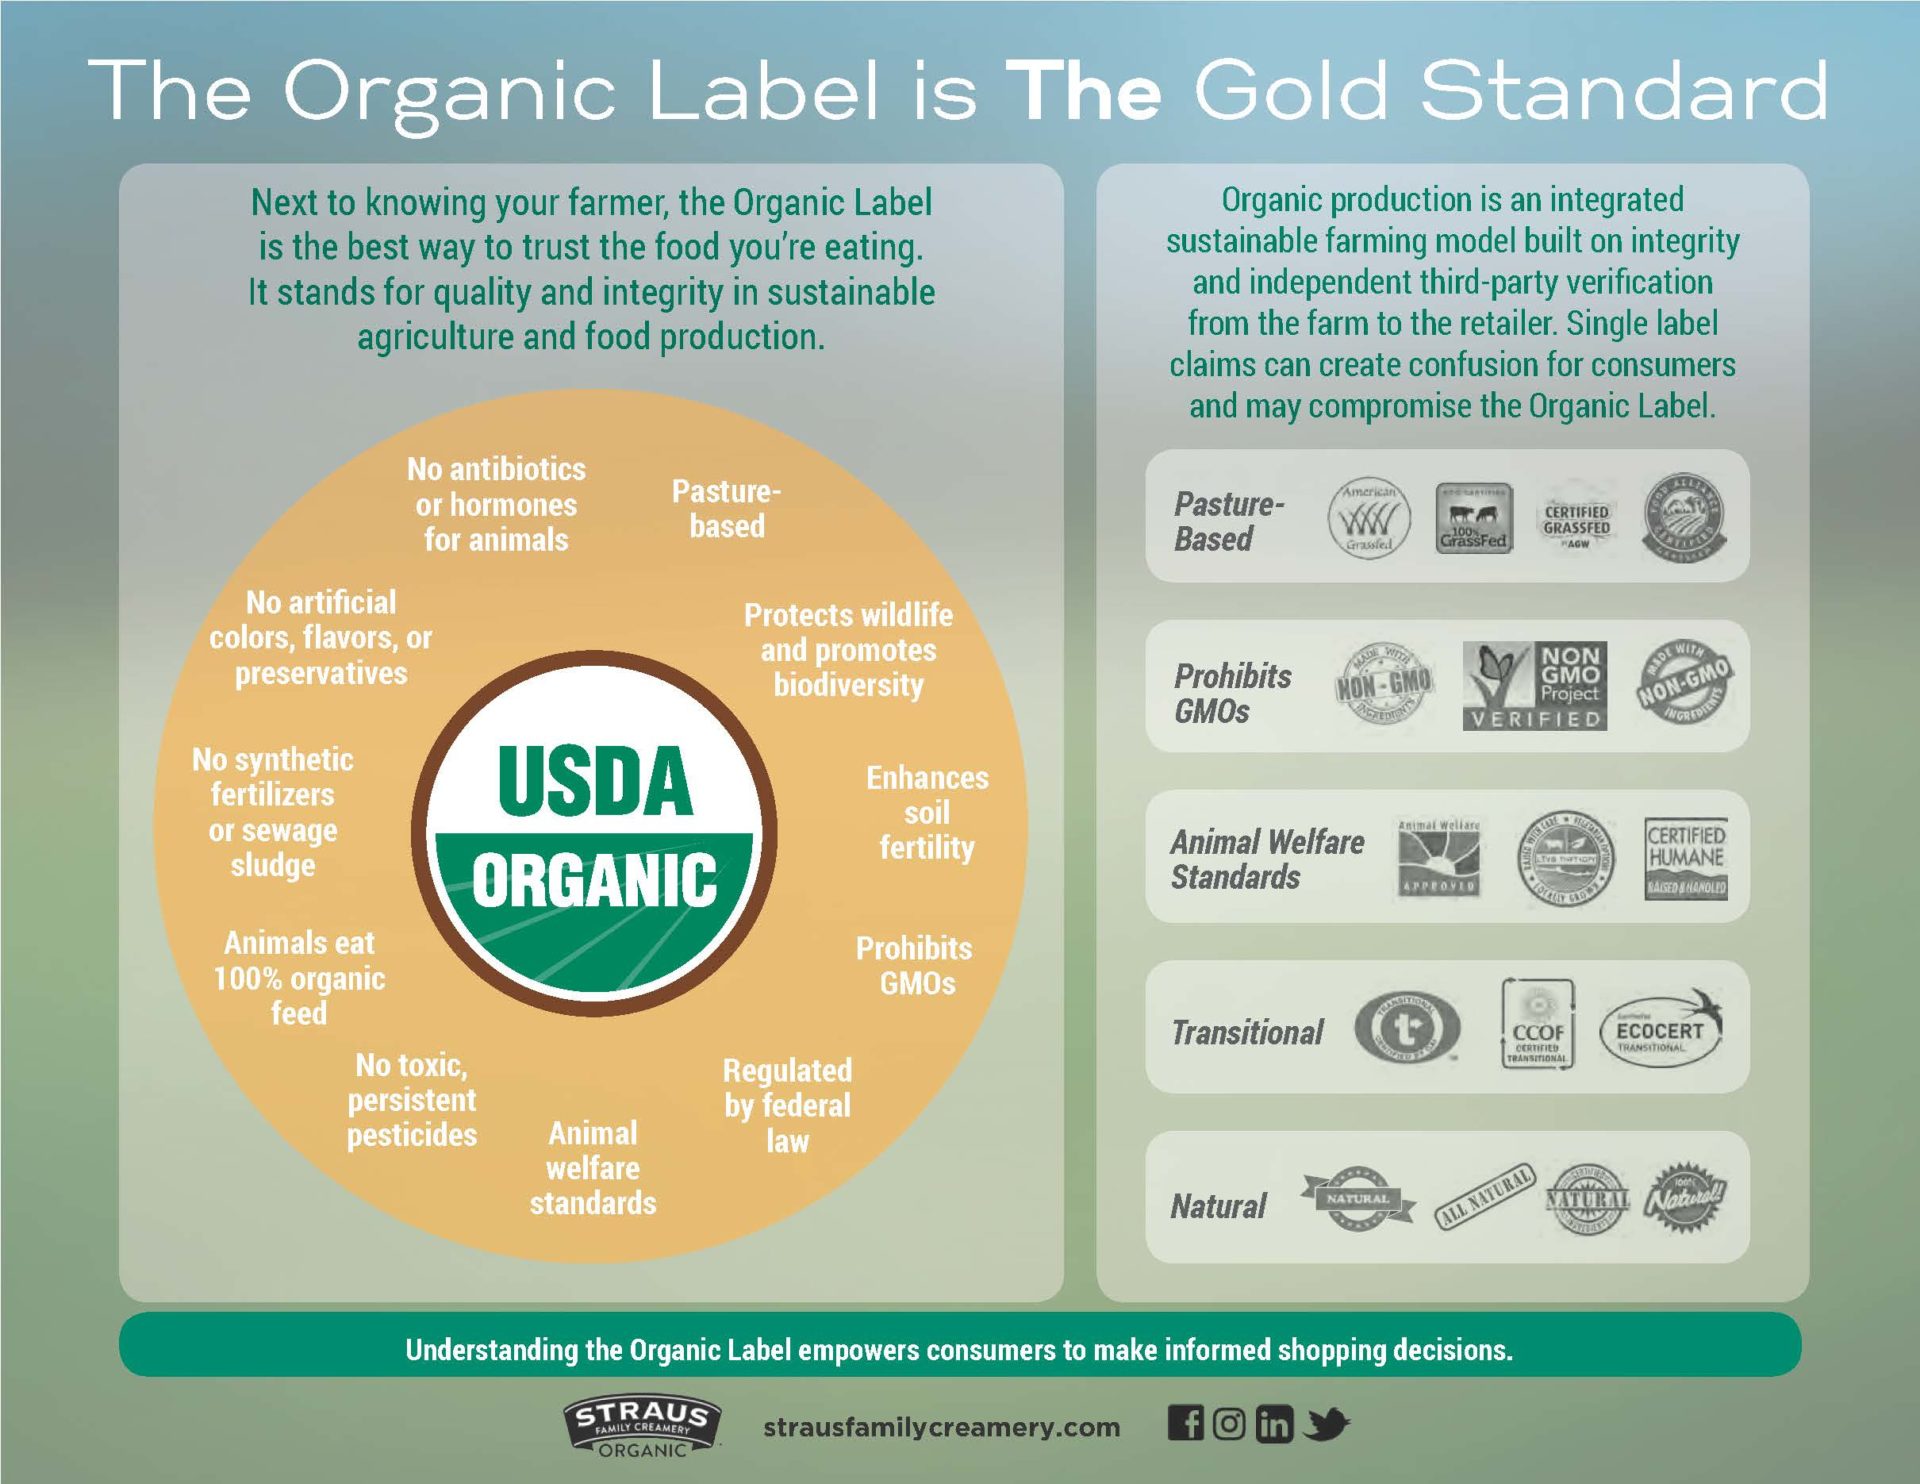 USDA organic: the organic label is the gold standard of sustainable farming